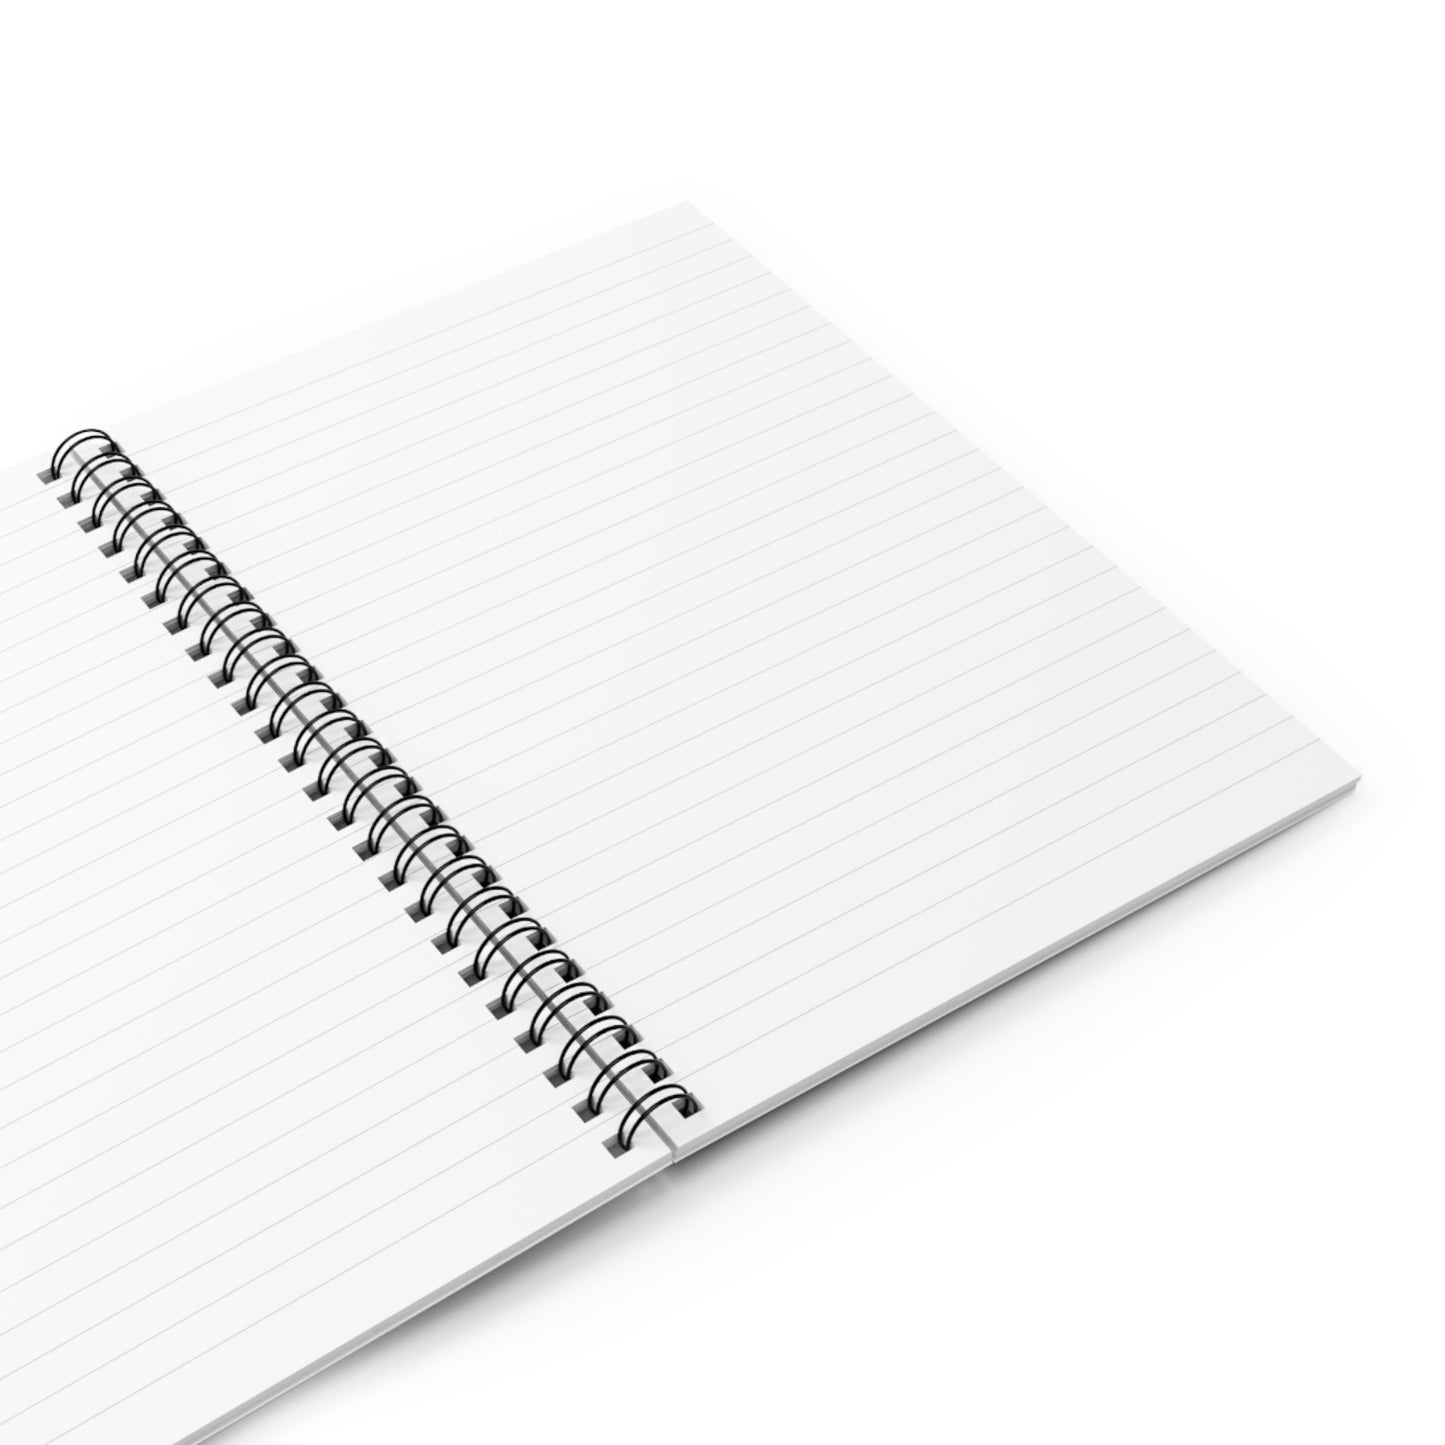 Spiral Notebook with Serene Peaceful Cover Opened with Blank White College Ruled Pages